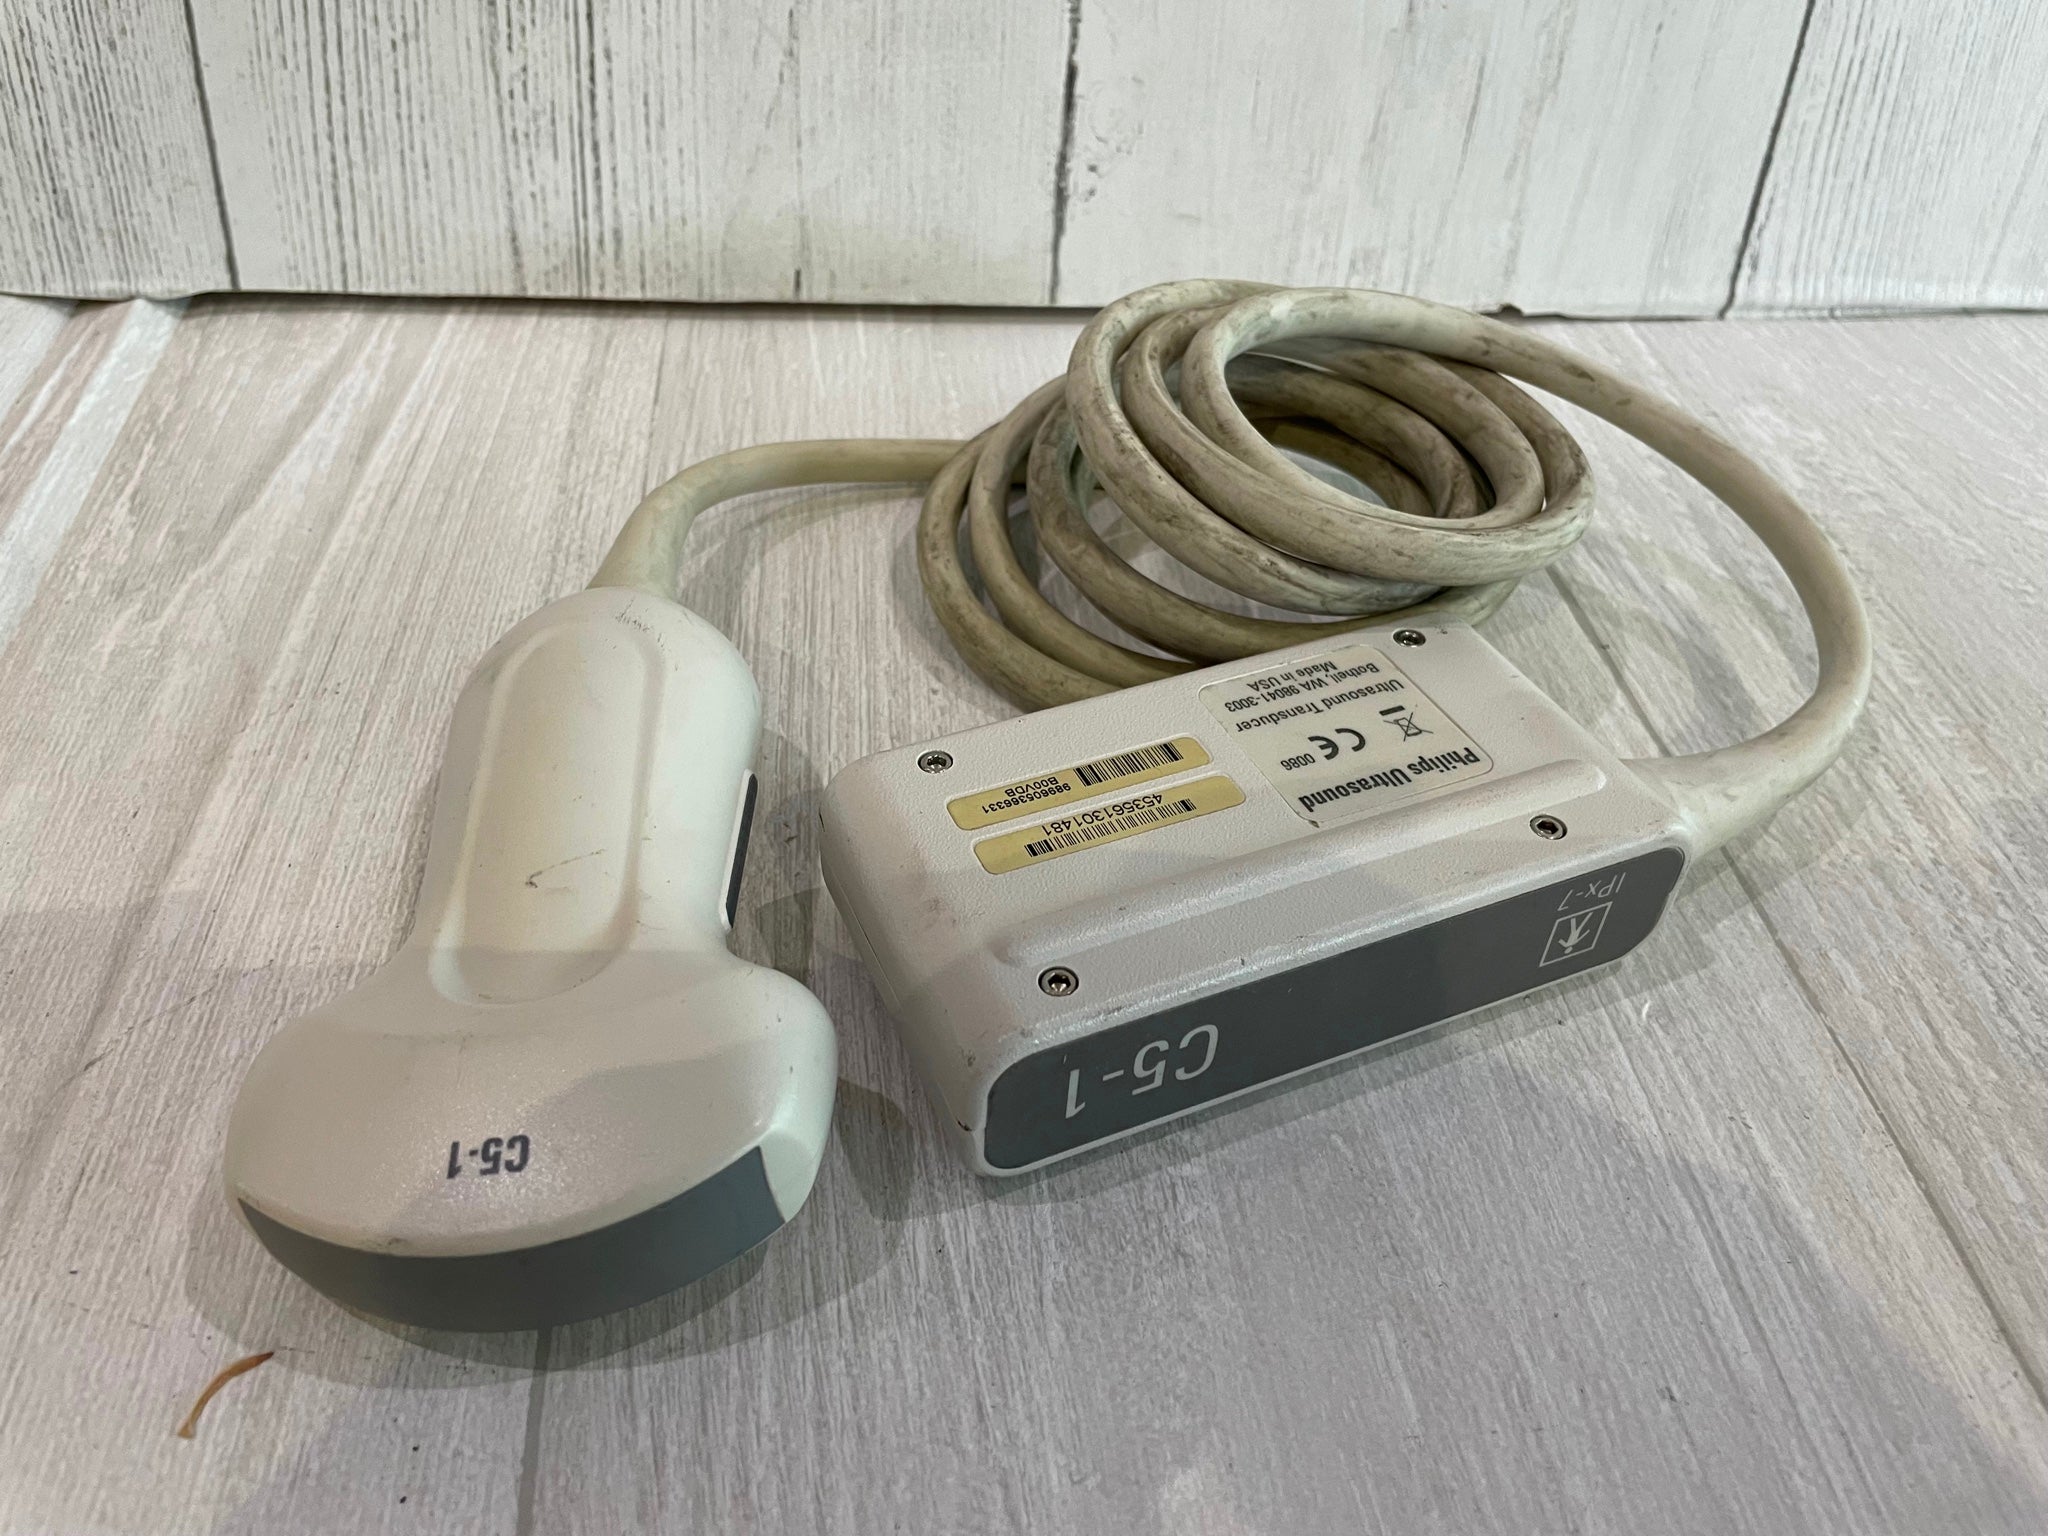 Philips C5-1 Compact Ultrasound Probe Transducer DIAGNOSTIC ULTRASOUND MACHINES FOR SALE